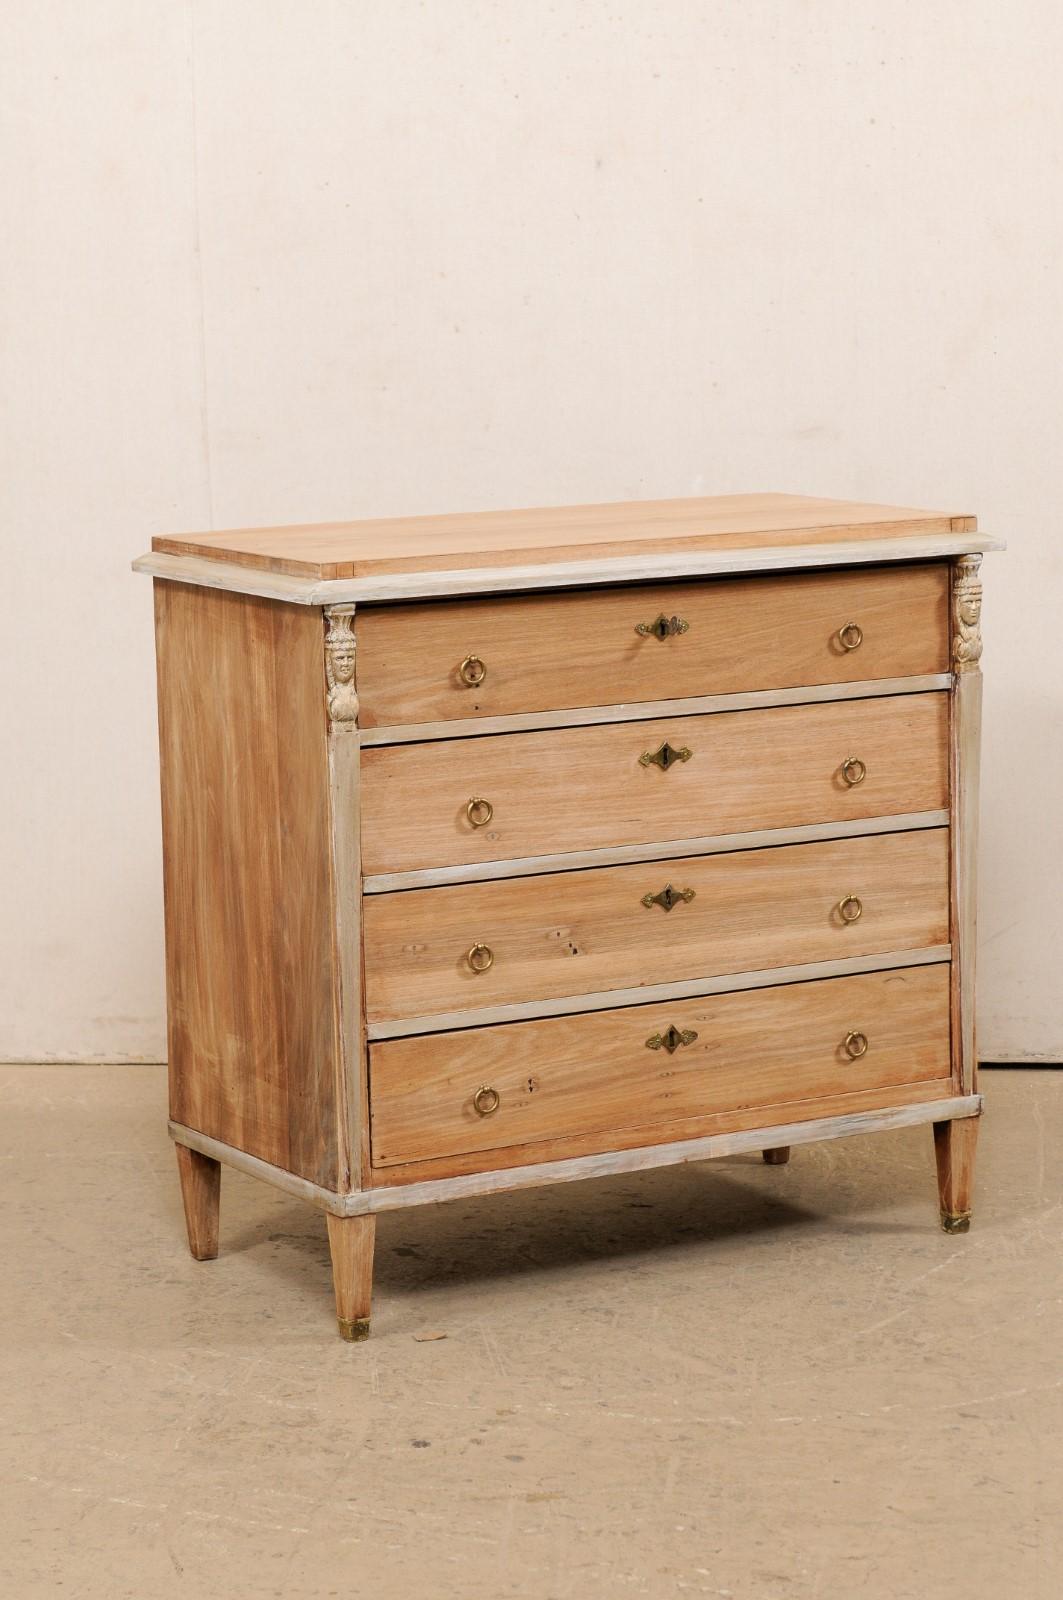 19th Century Swedish Gustavian Chest of Drawers w/ Revival-Style Carved Figurehead Accents